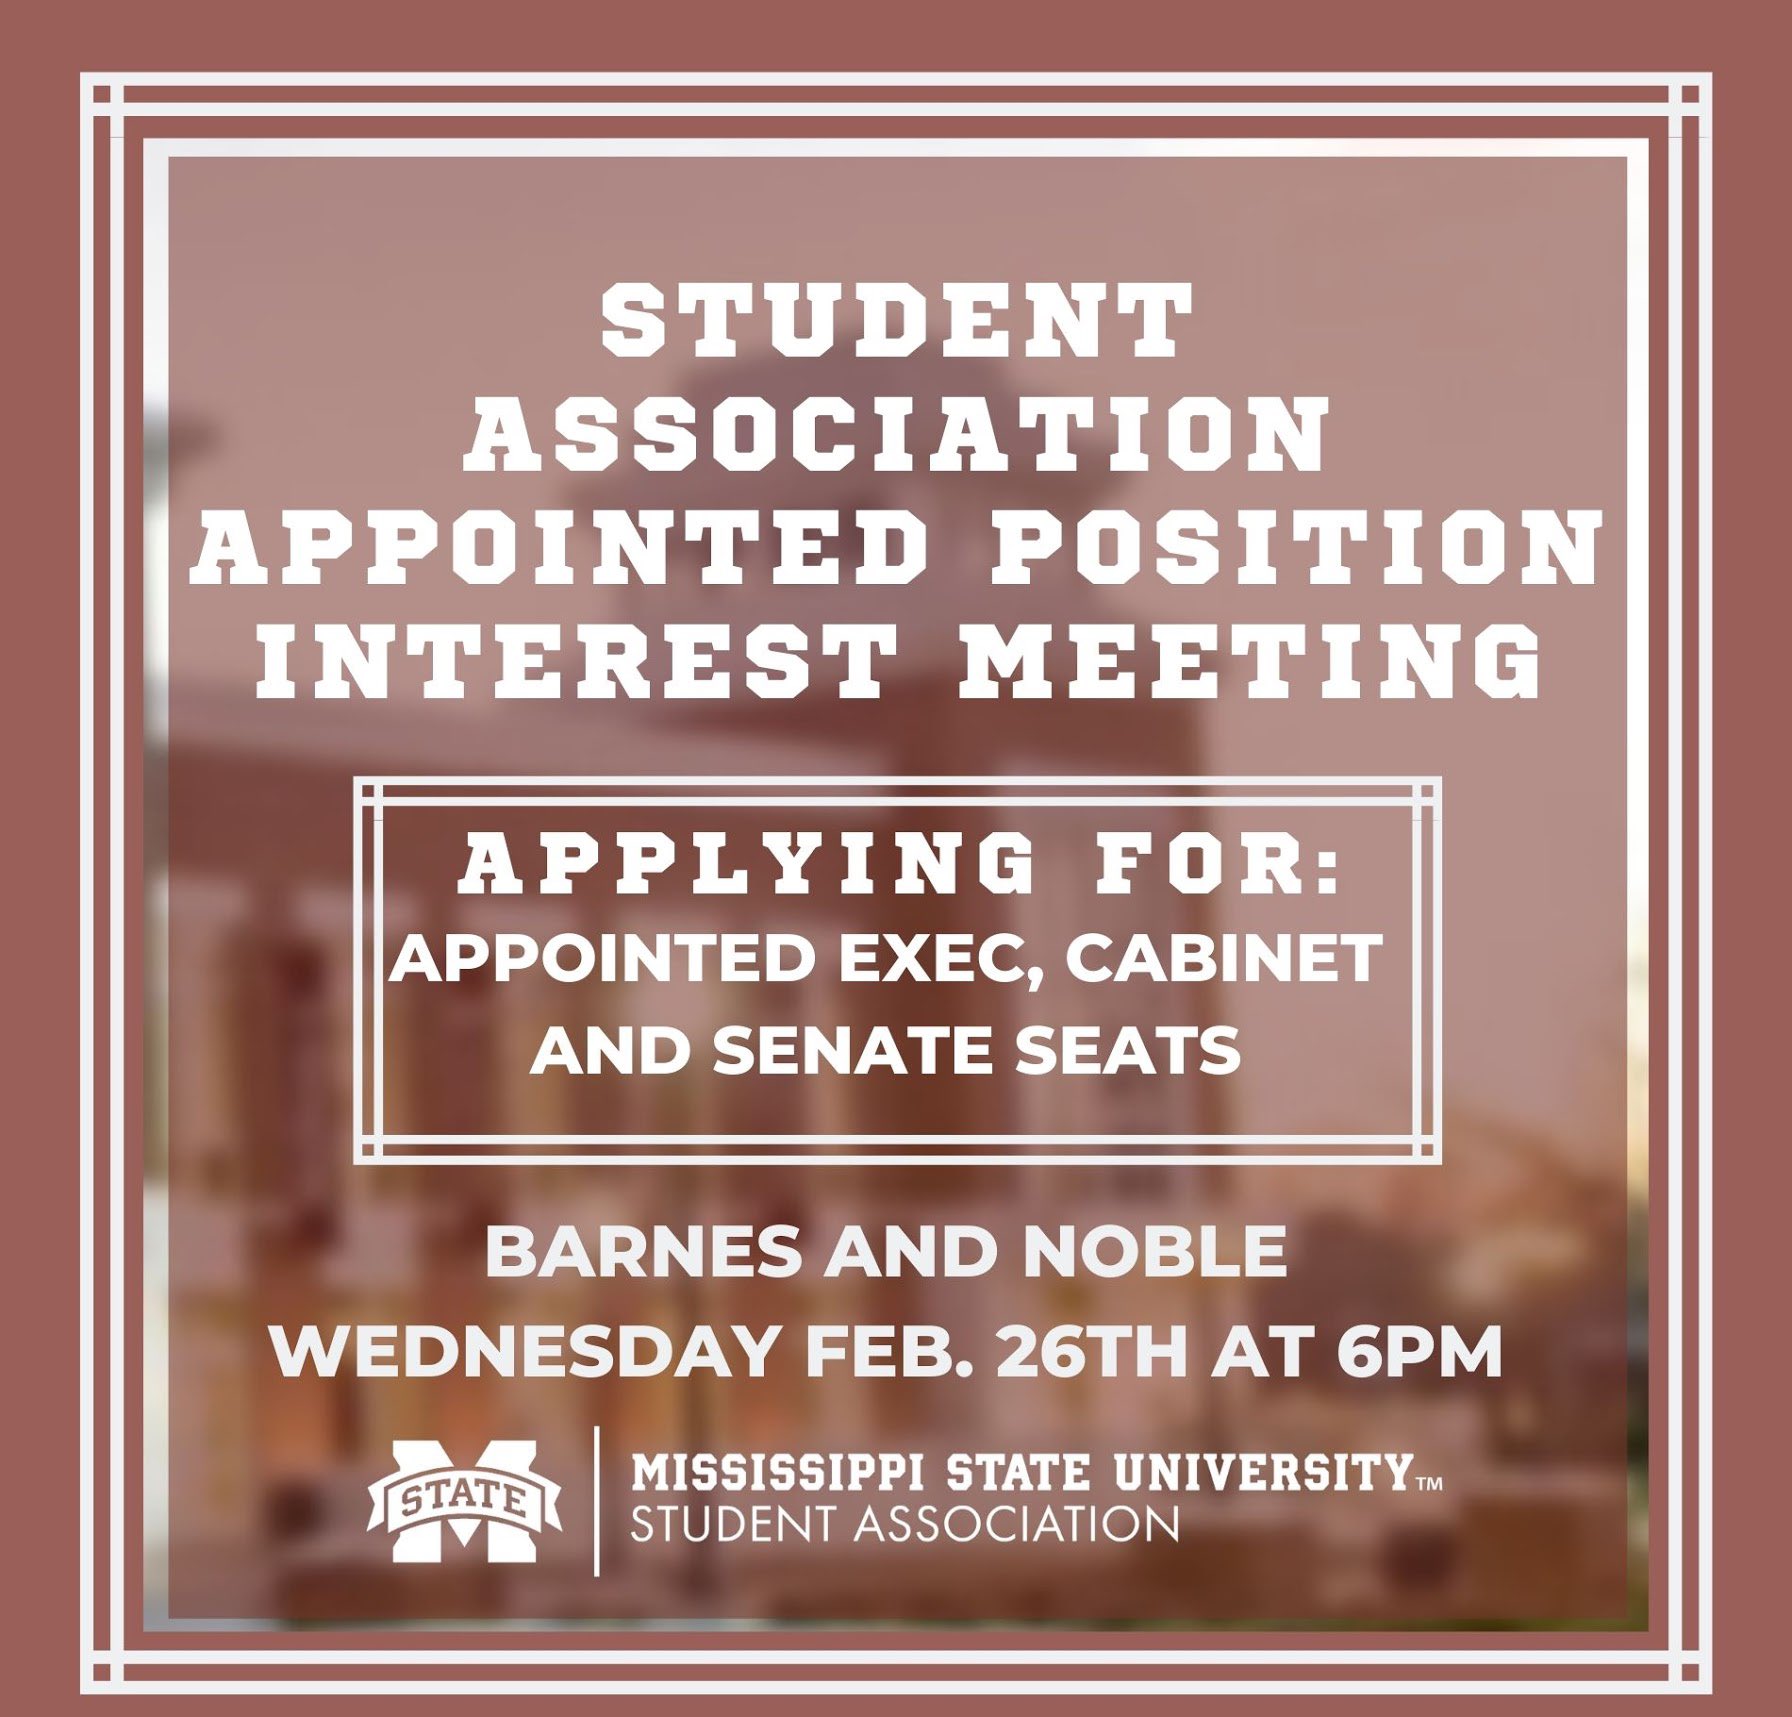 Promotional graphic for Student Association Appointed Position Interest Meeting